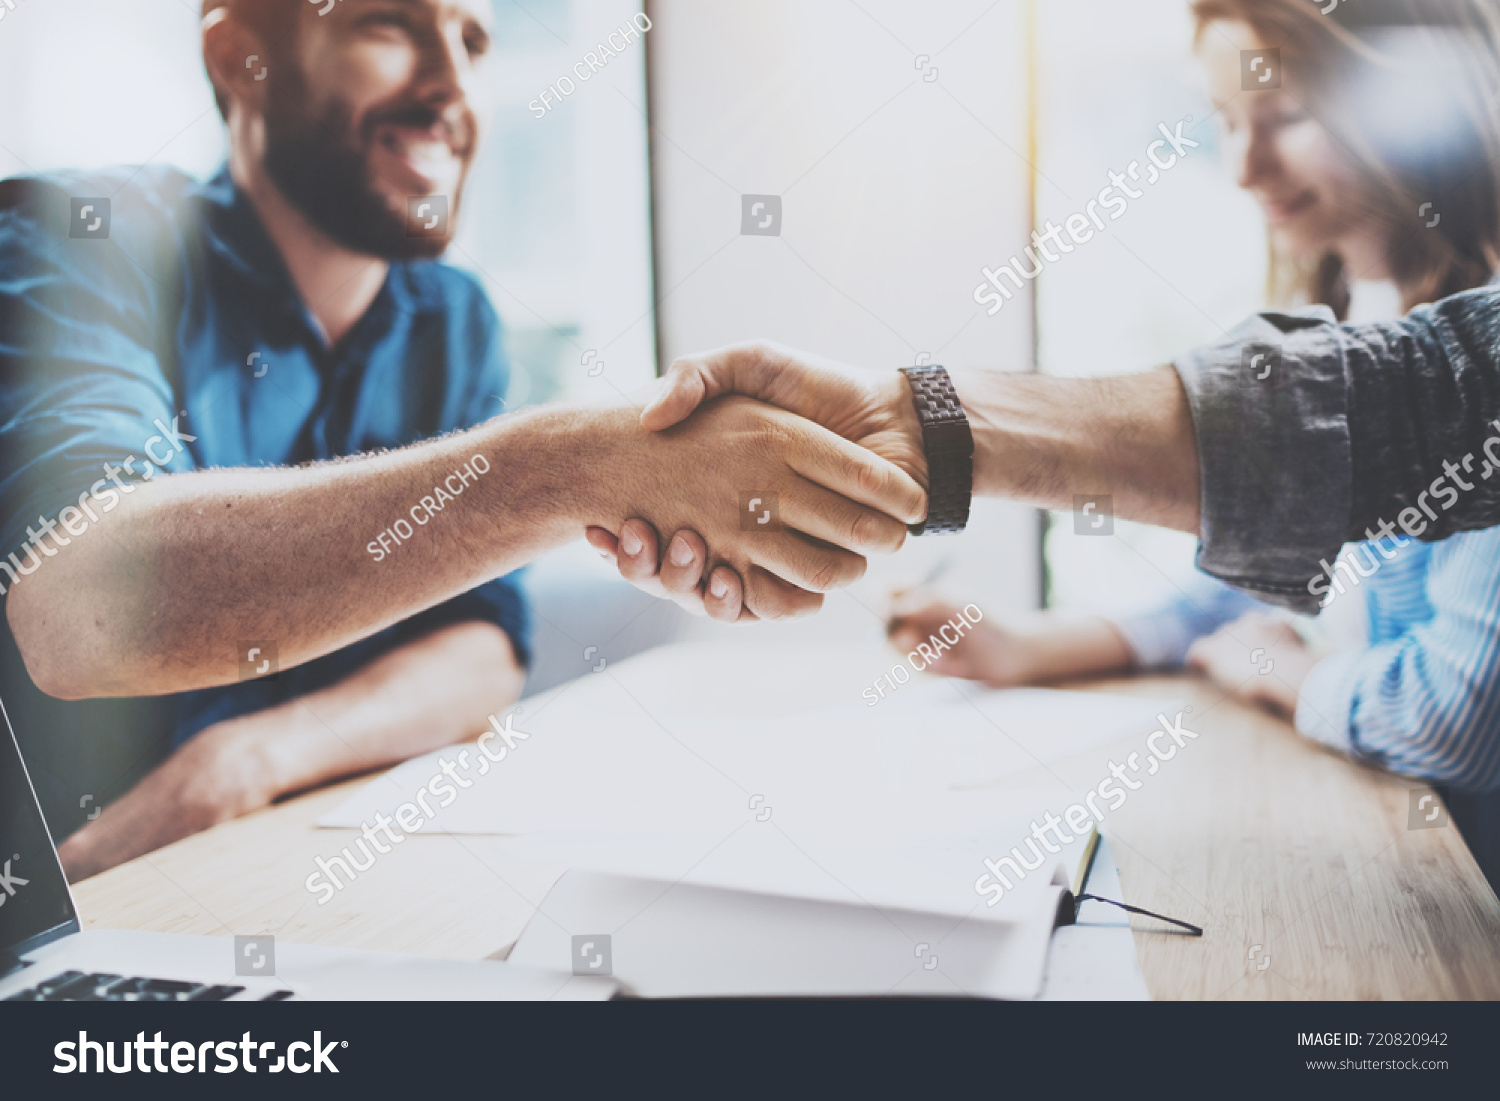 Business male partnership handshake concept.Photo two mans handshaking process.Successful deal after great meeting.Horizontal, blurred background #720820942